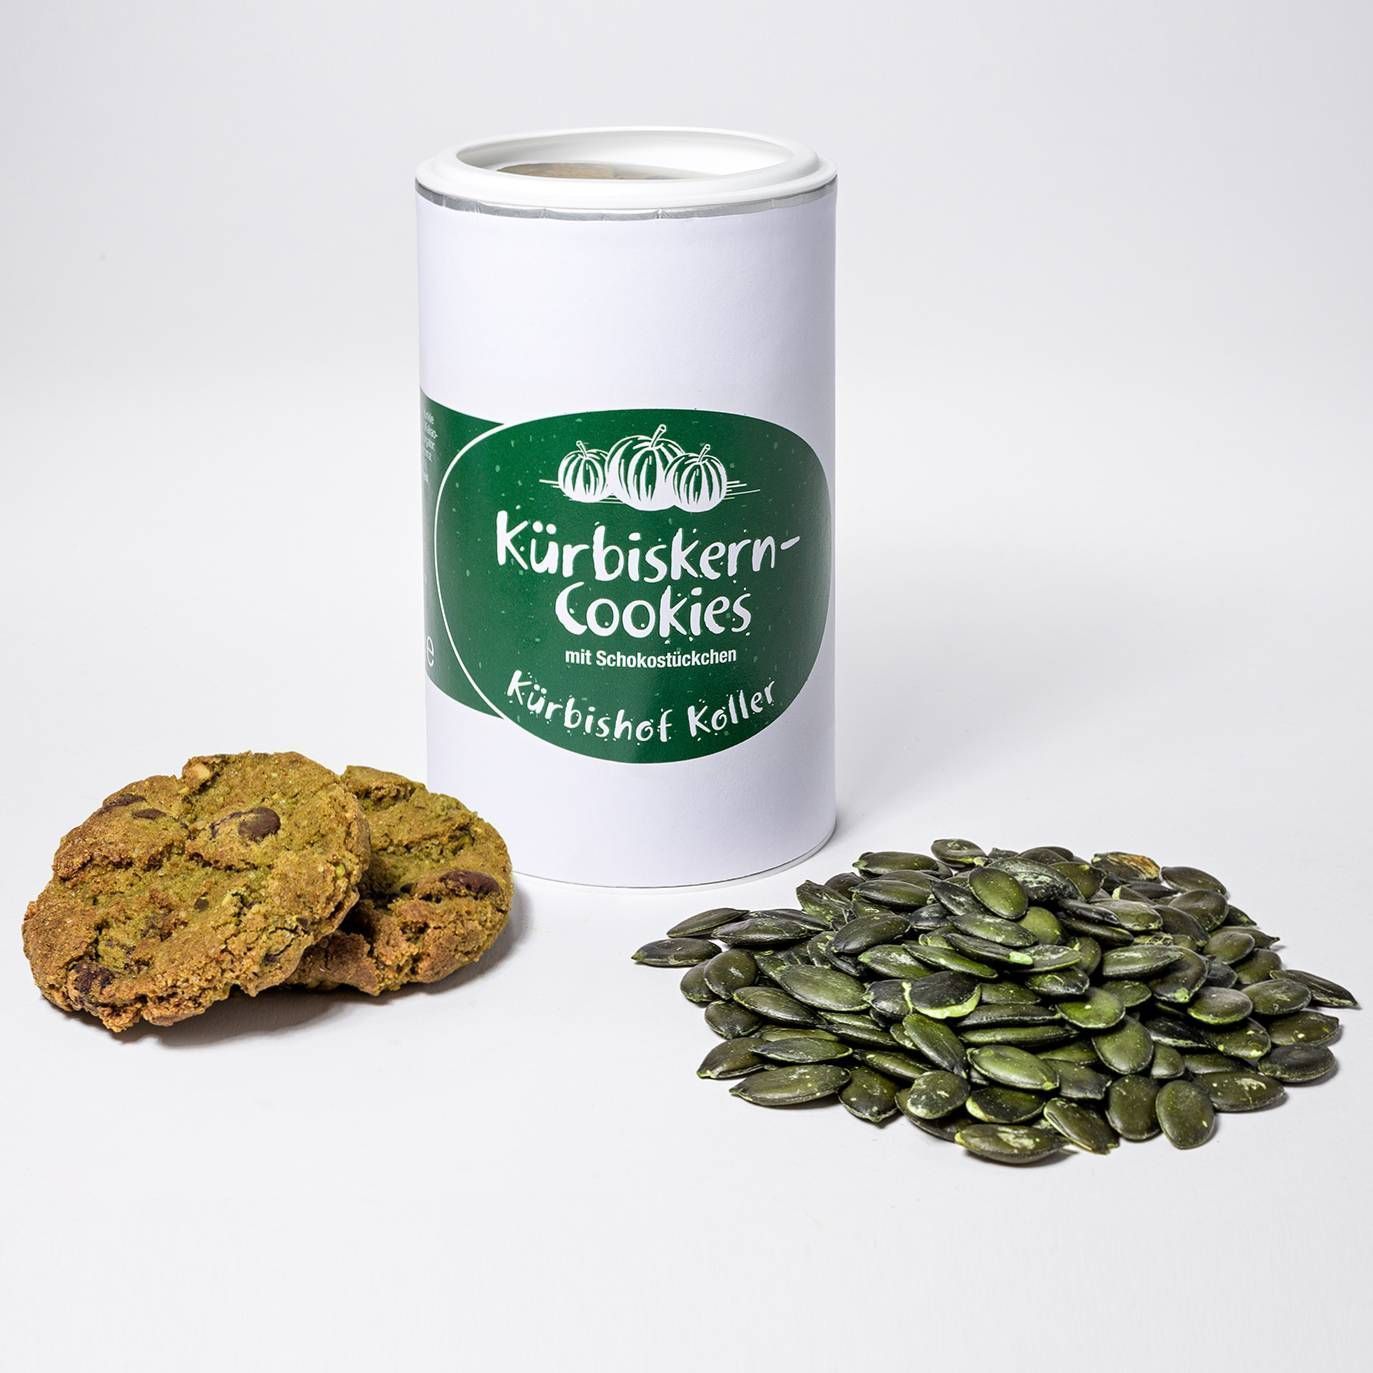 Pumpkin Seed Cookies with Chocolate Chips in France